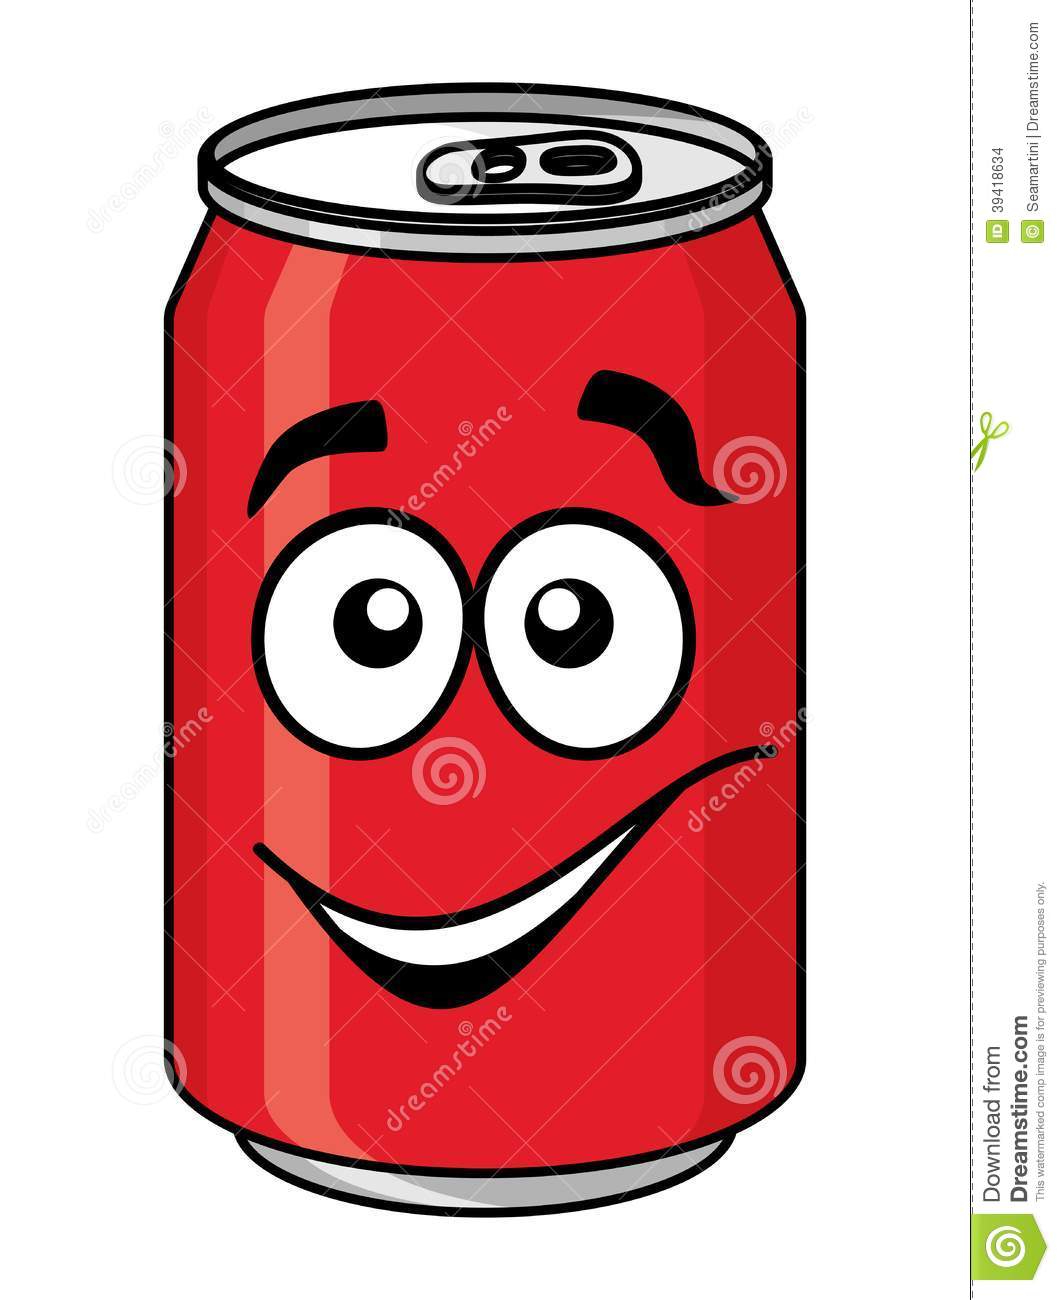 Red Cartoon Soda Or Soft Drink Can With A Smiling Face Isolated On